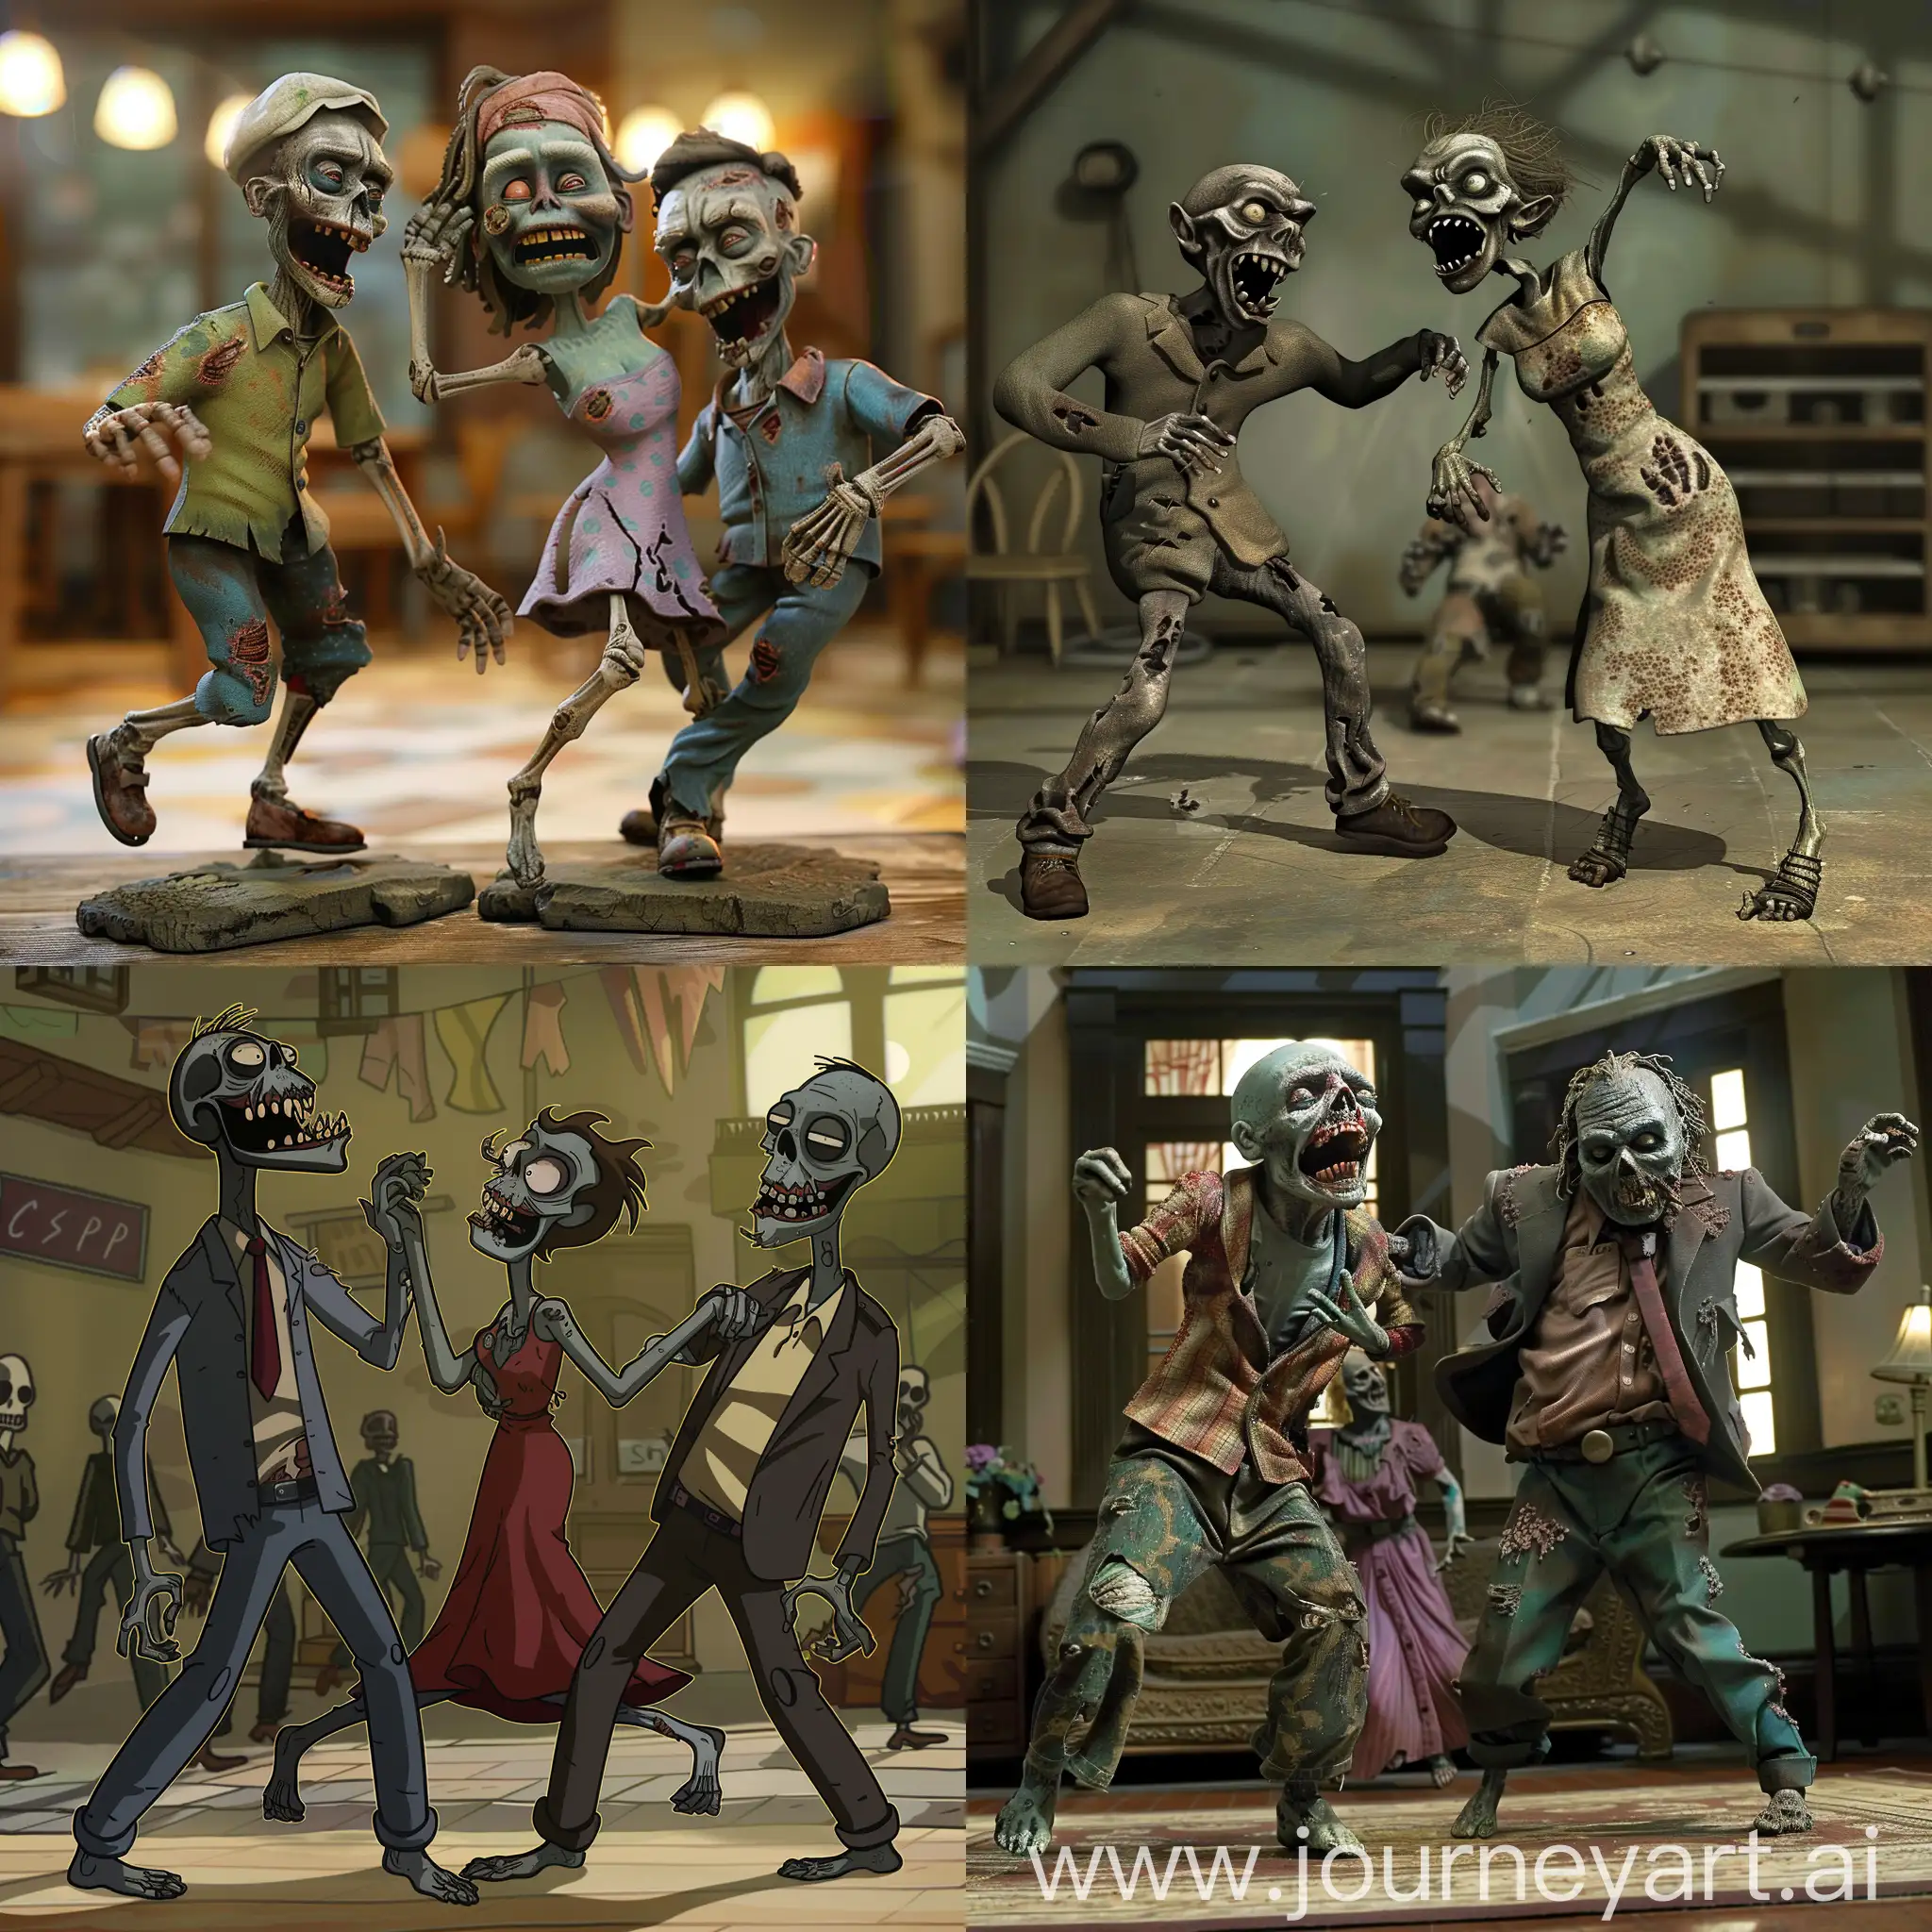 animation kind of two male zombies and one female zombie dancing